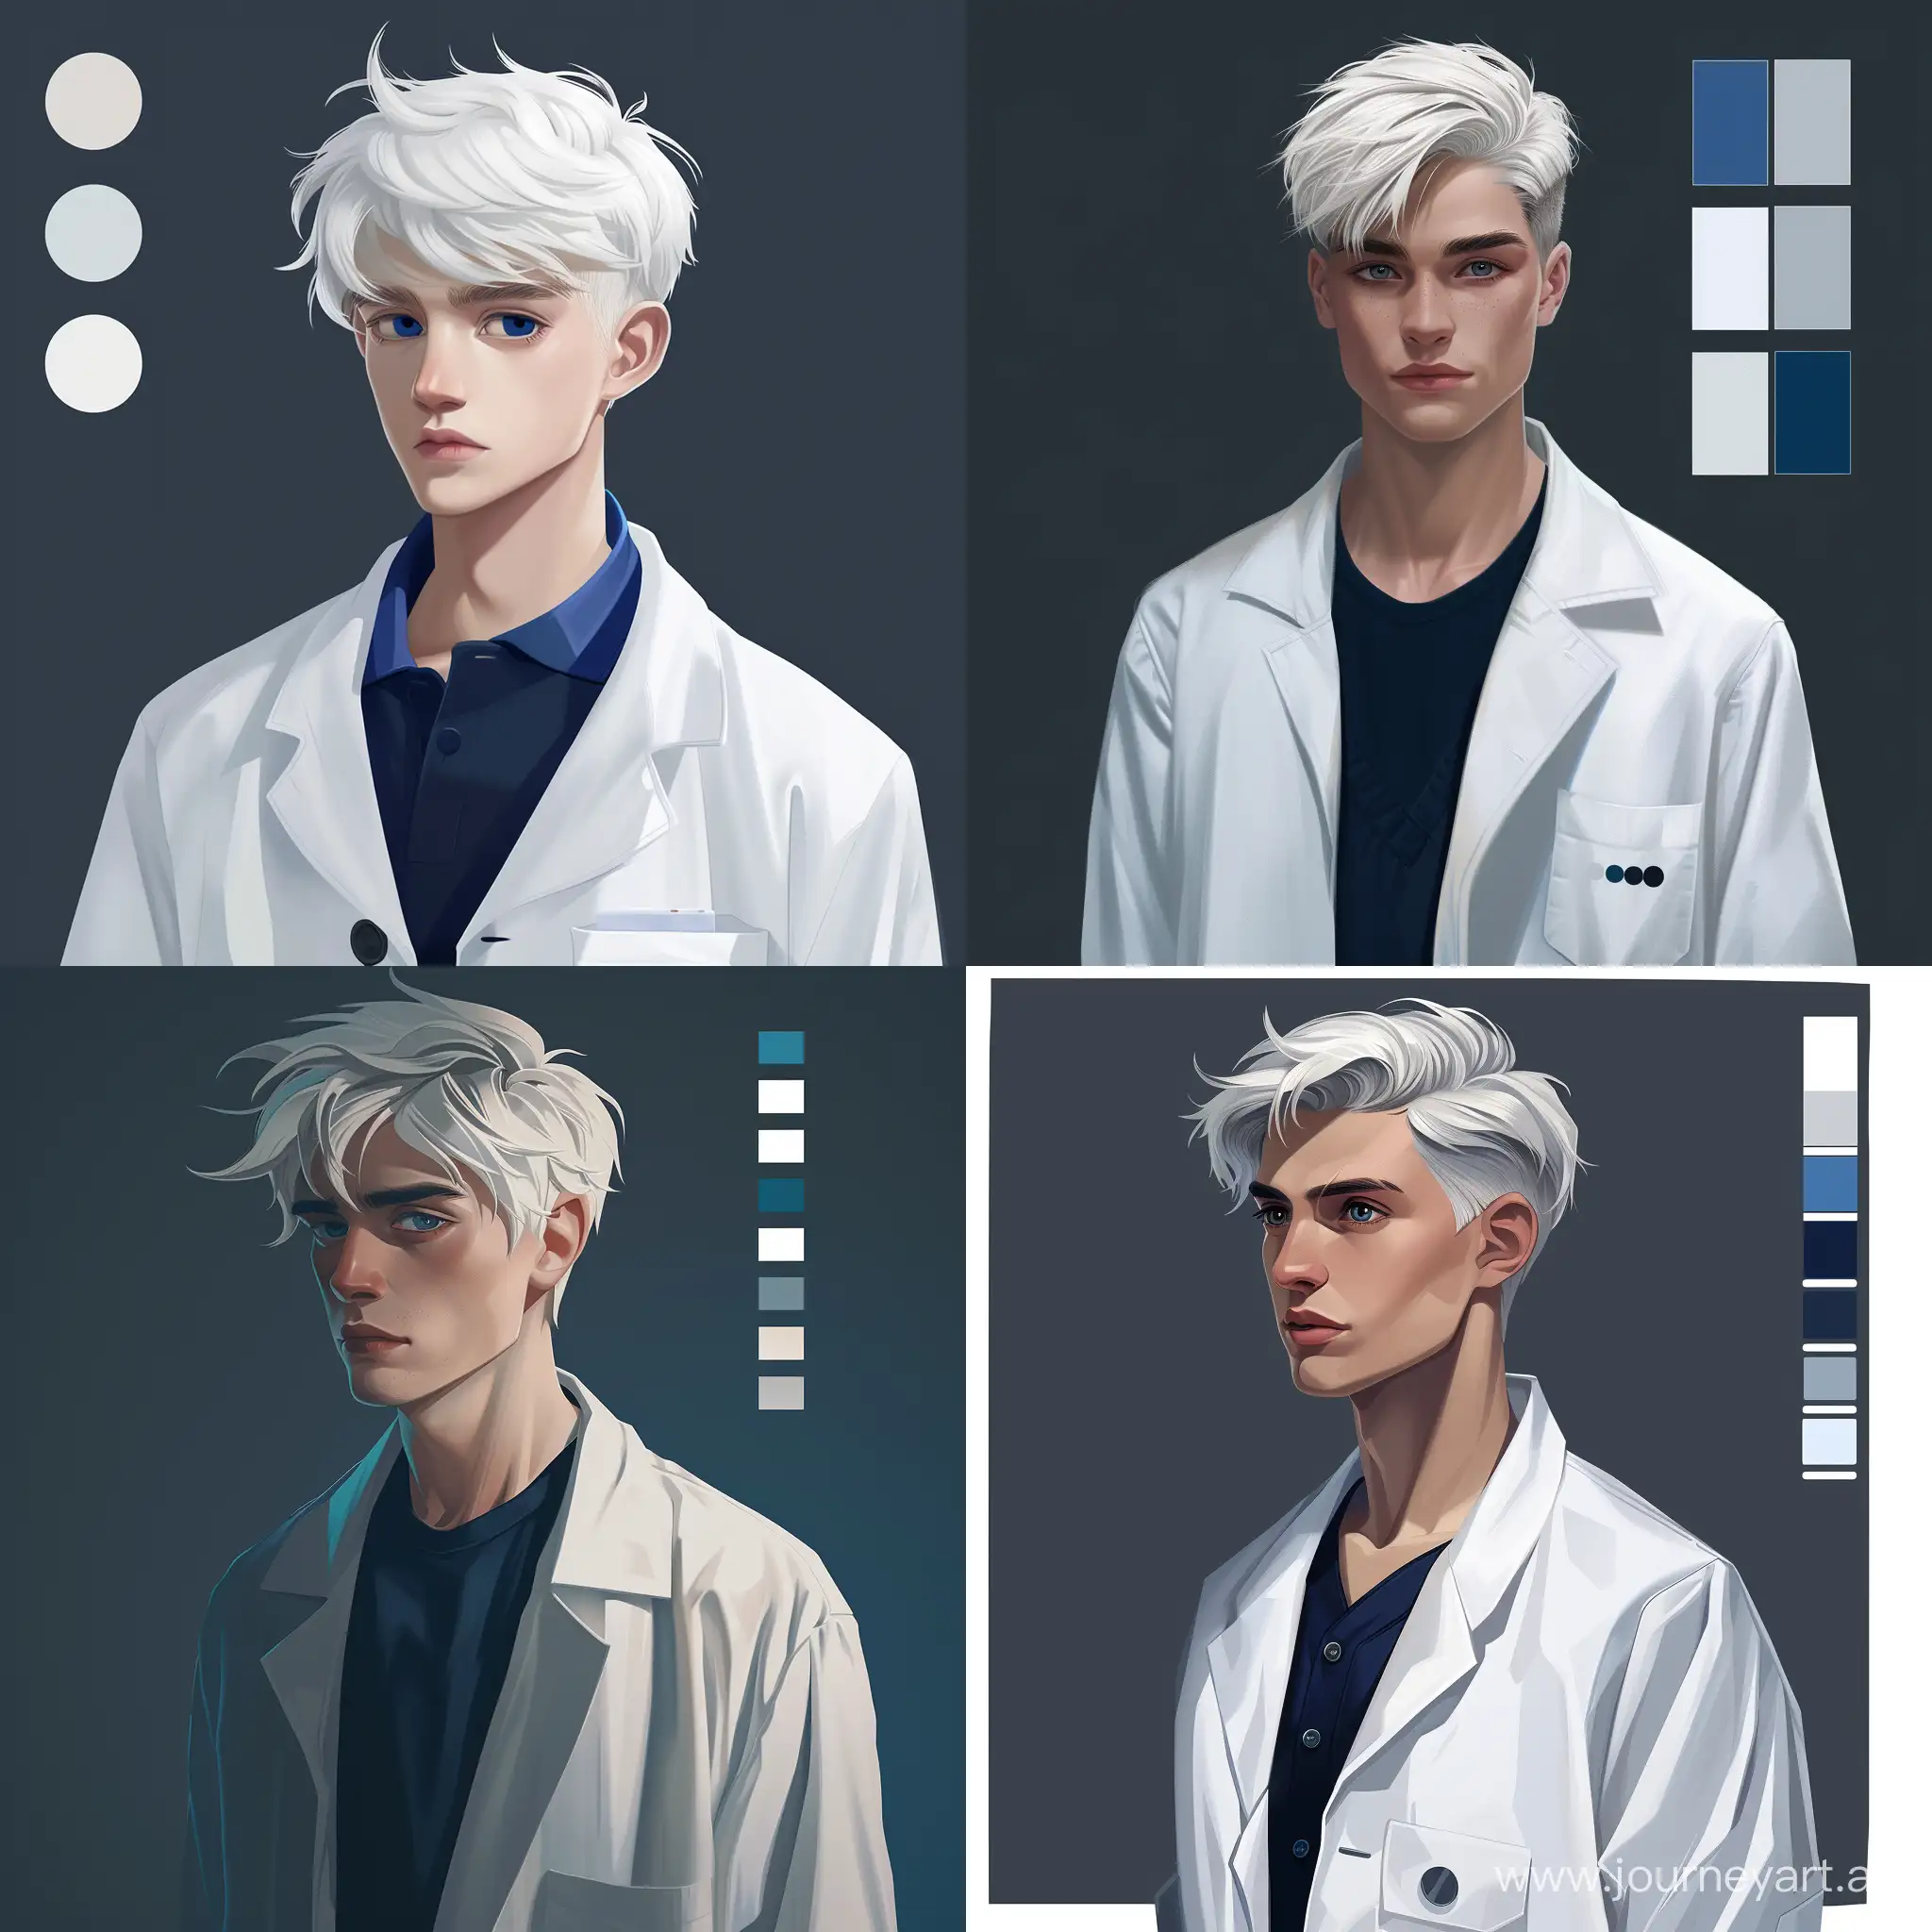 realistic male Vtuber avatar. Short white hair with a lab coat. Color palette: white, blue, dark grey

